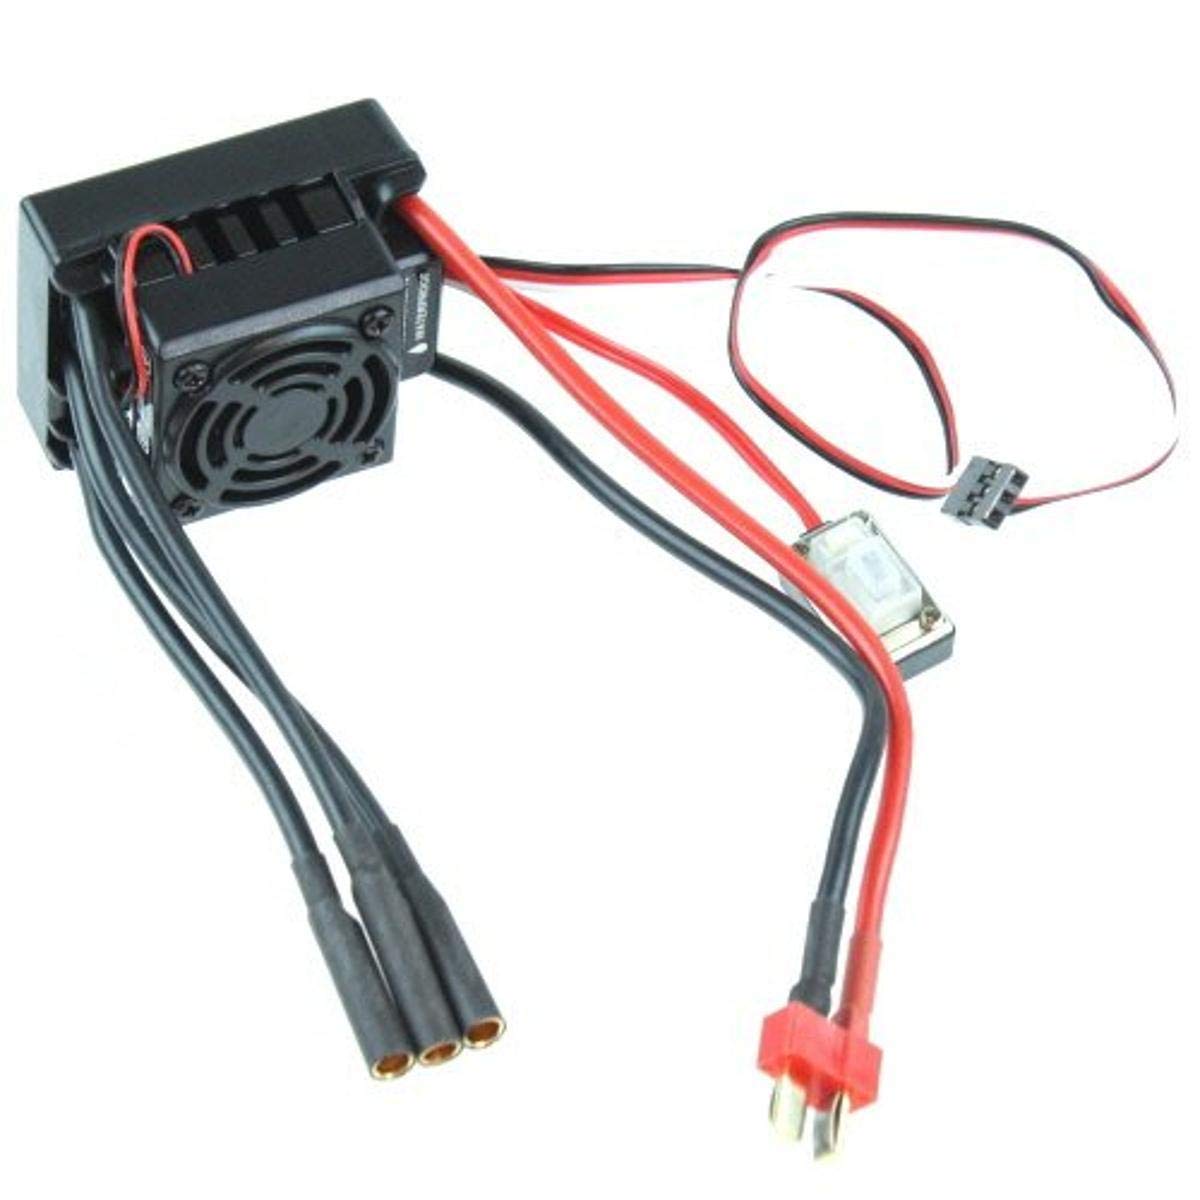 Redcat Racing HW-WP-10BL60-RTR-D Hobbywing 60A Brushless Speed controller Splashproof Deans connector